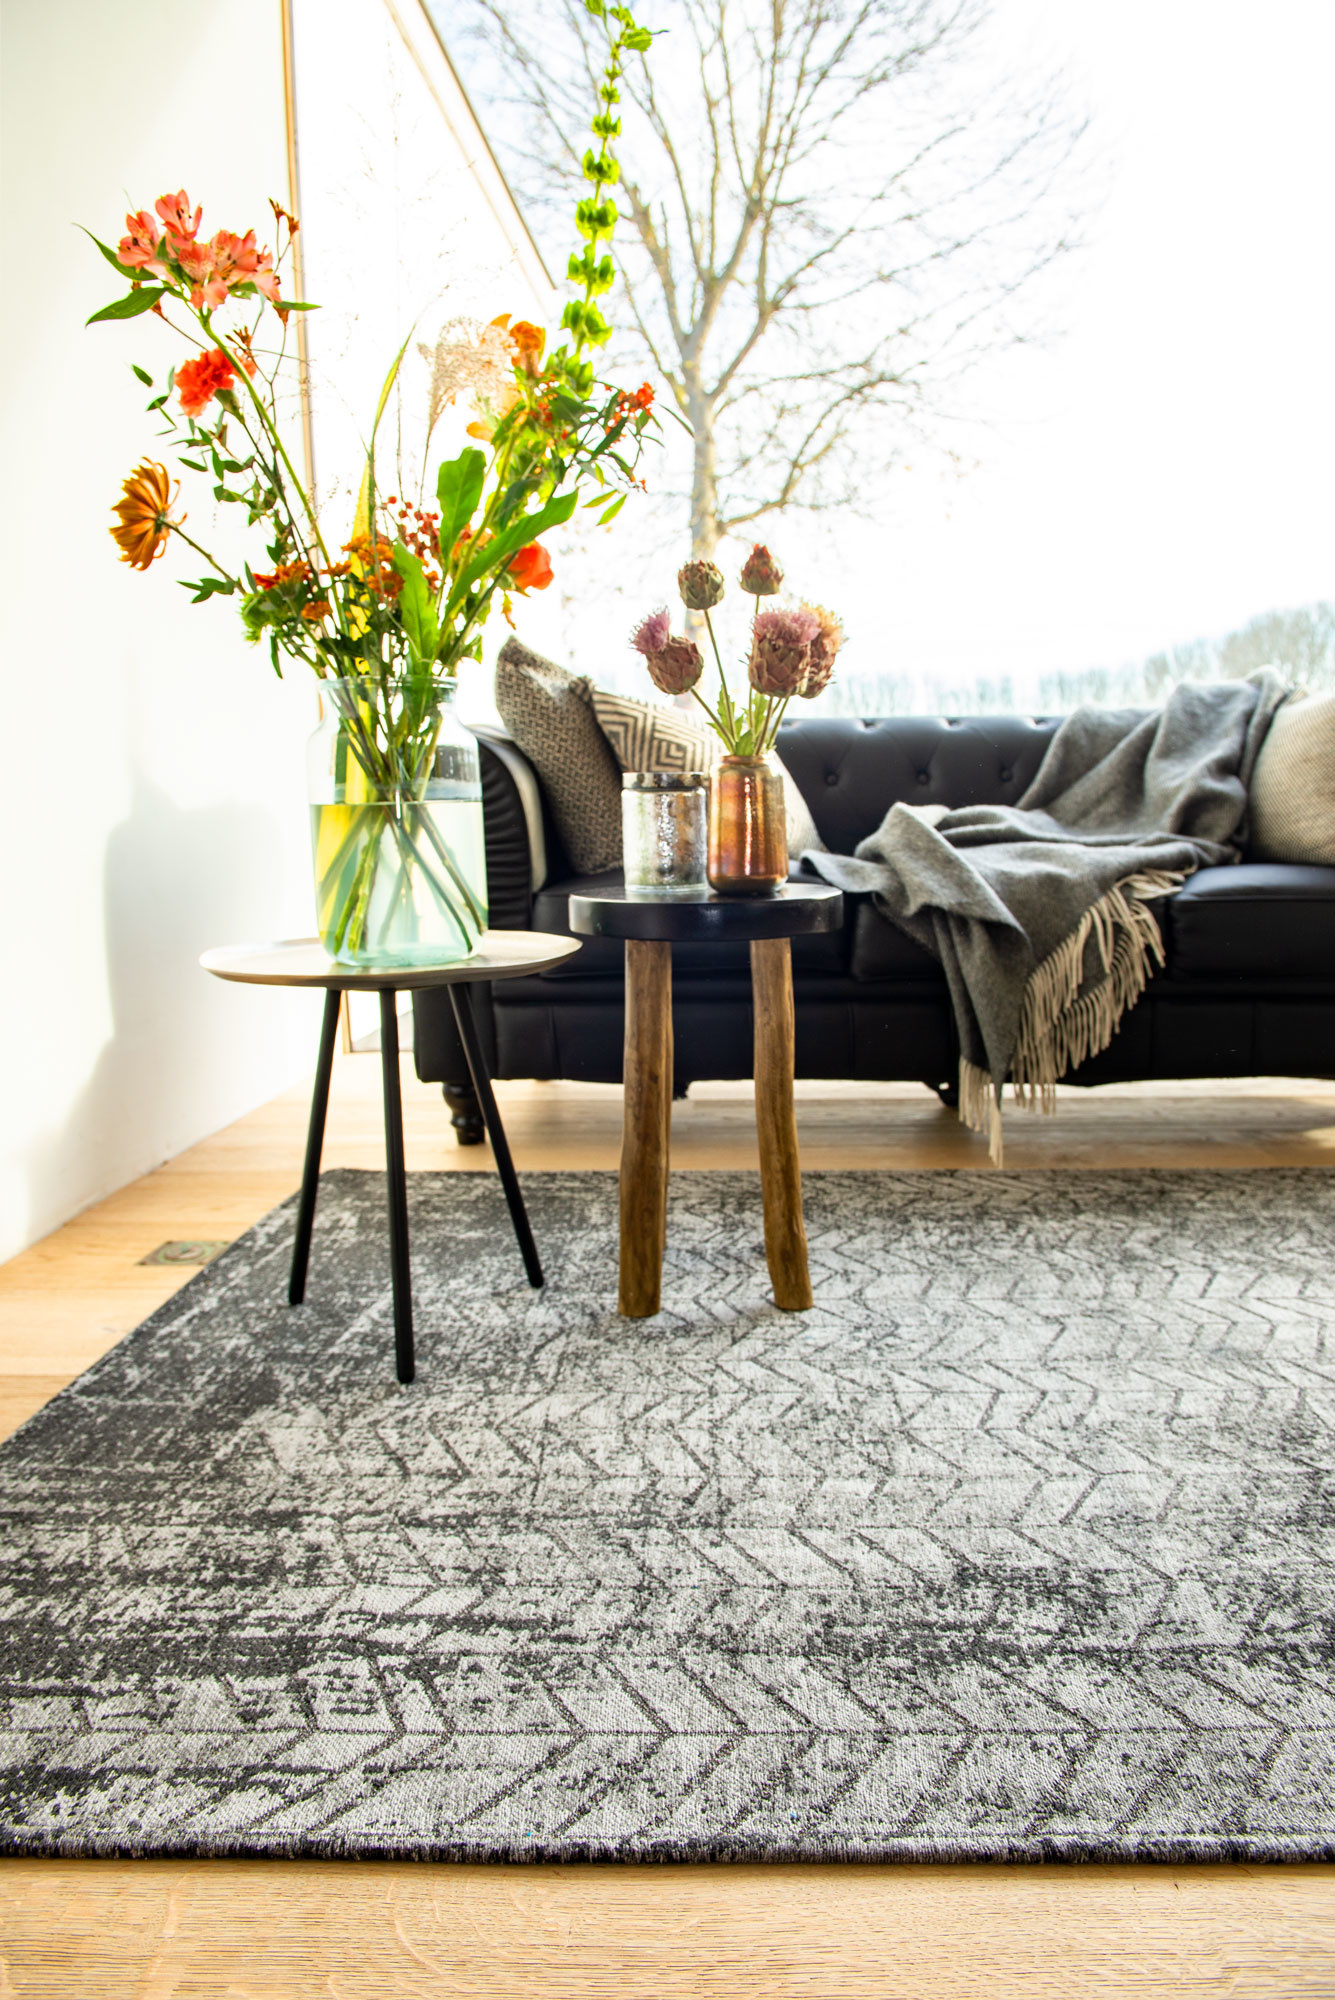 Abstract Flatwoven Grey Rug ☞ Size: 5' 7" x 8' (170 x 240 cm)